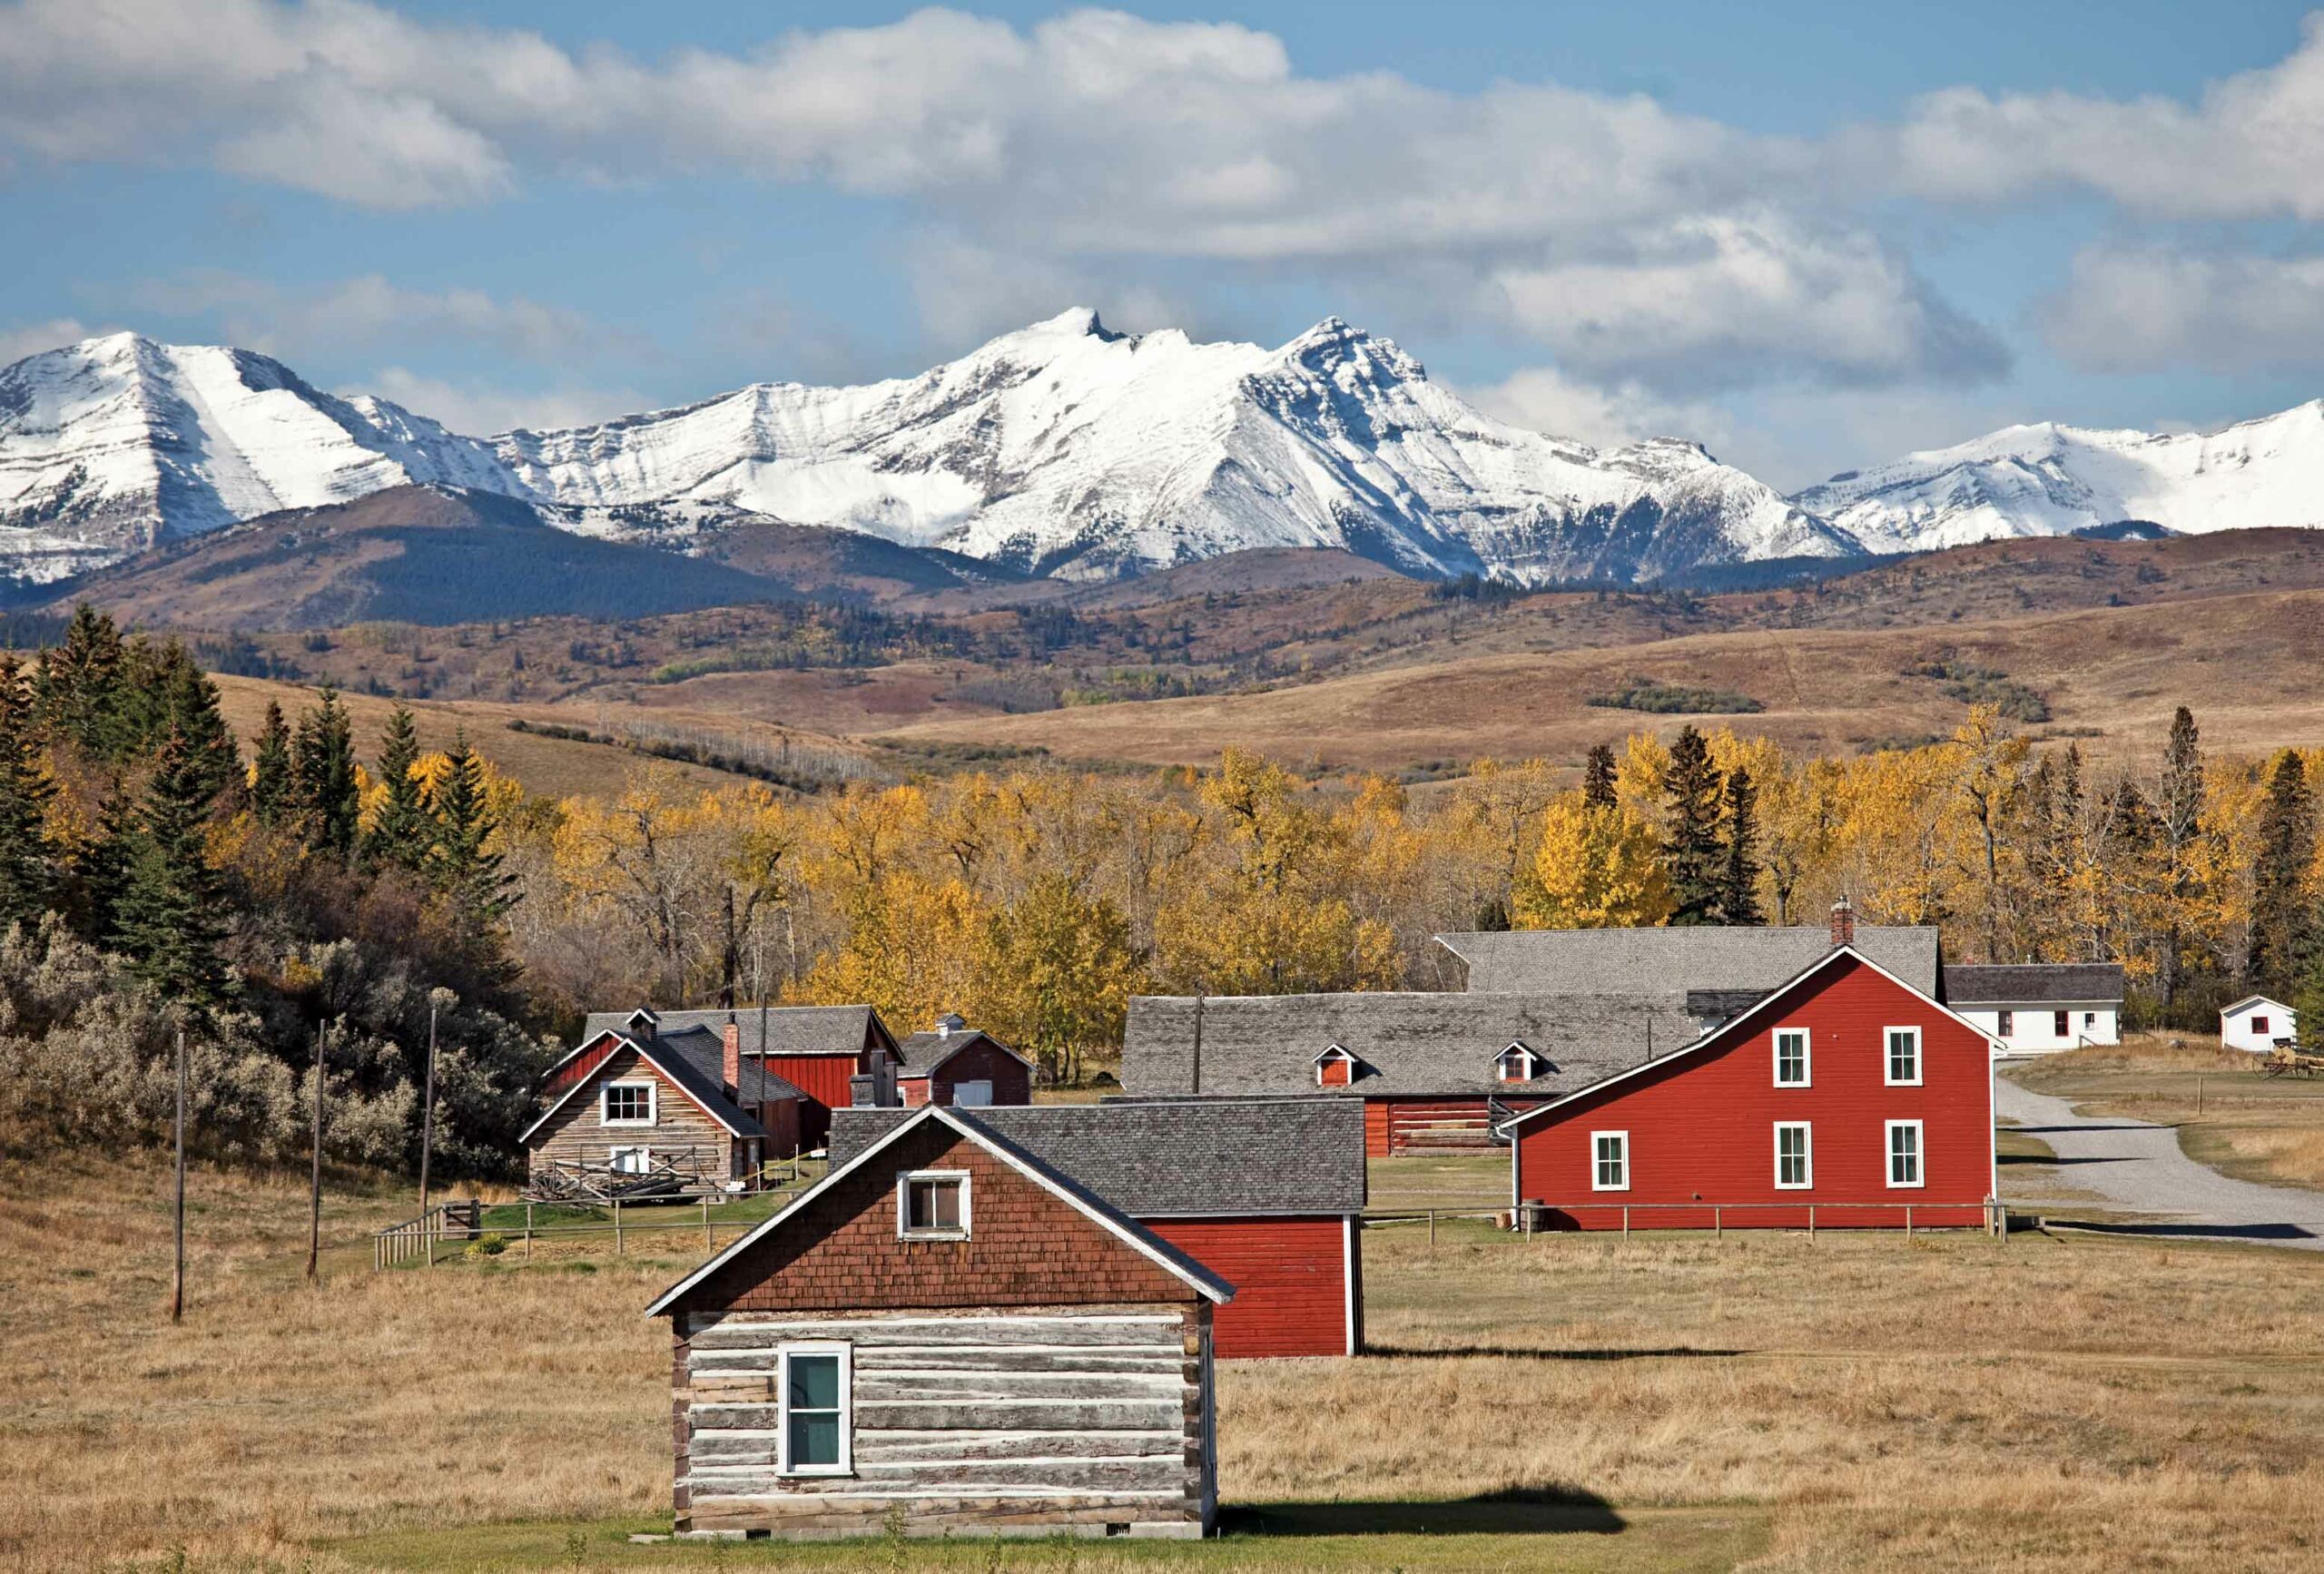 The Bar U National Historic Site, with its spectacular views and rich history is a perfect stop as you explore the Foothills. Travel Alberta | Andrew Penner.